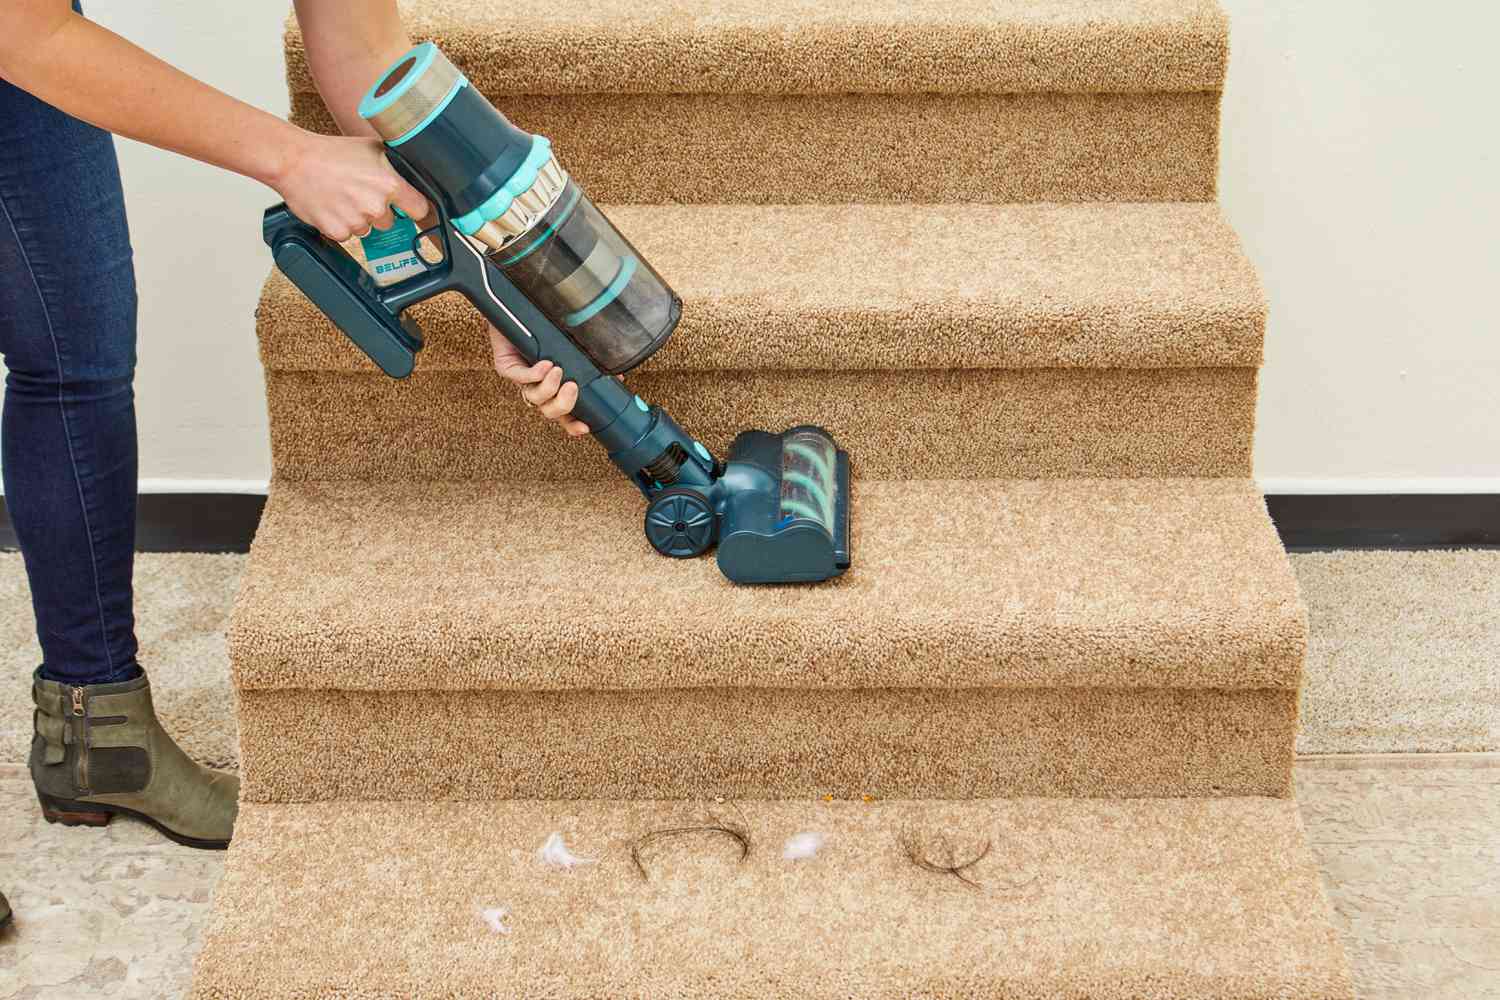 A person uses the Belife V12 Cordless Vacuum Cleaner's handheld attachment on carpeted stairs.